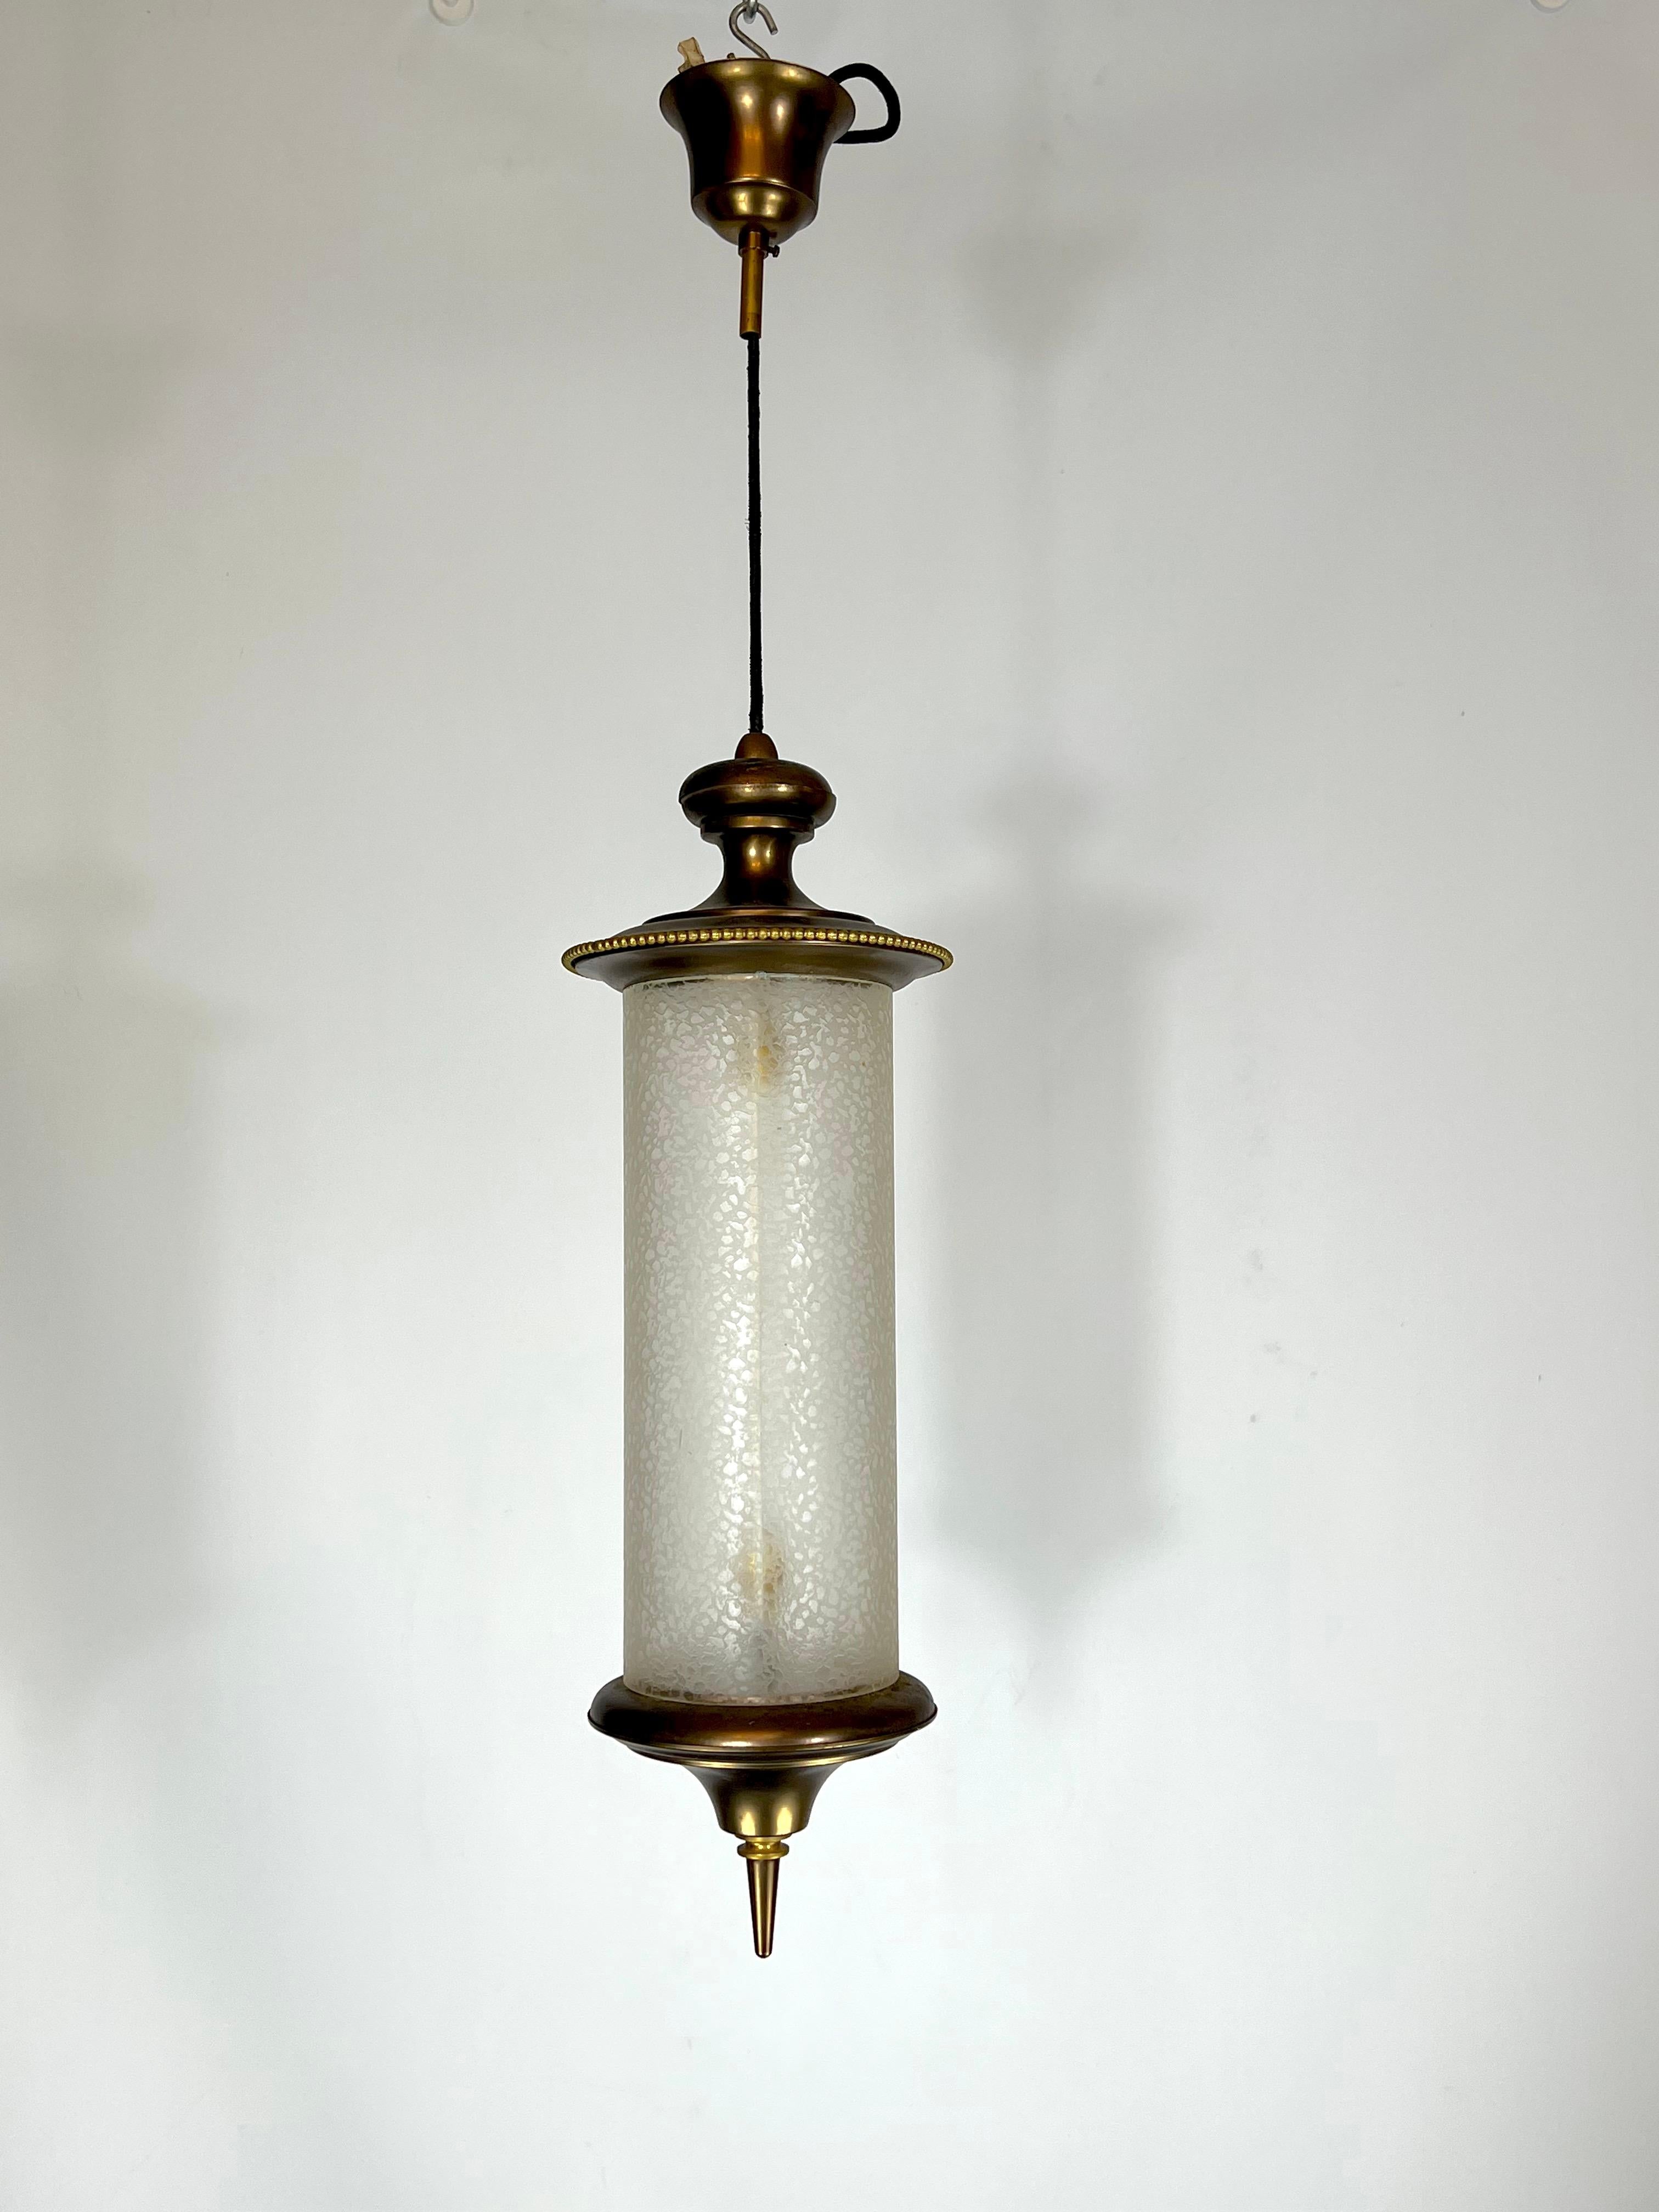 Good vintage condition with normal trace of age and use. Original patina on the brass. It is made from brass and glass. Produced by Lumi Milano during the 50s. Fixture height without rod 50 cm. Full working with EU standard, adaptable on demand for